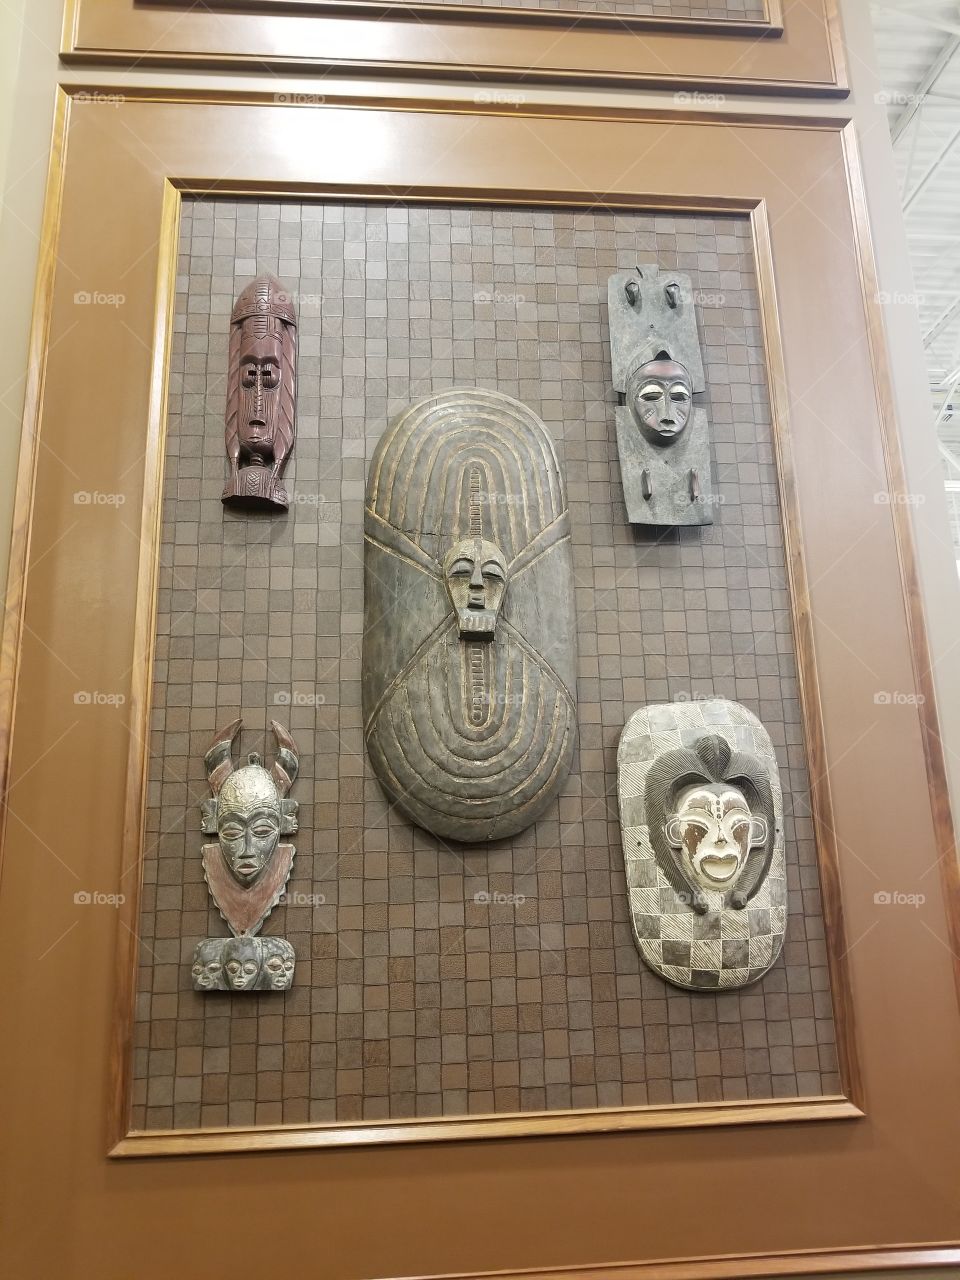 I think is African art? not sure but it looks awesome